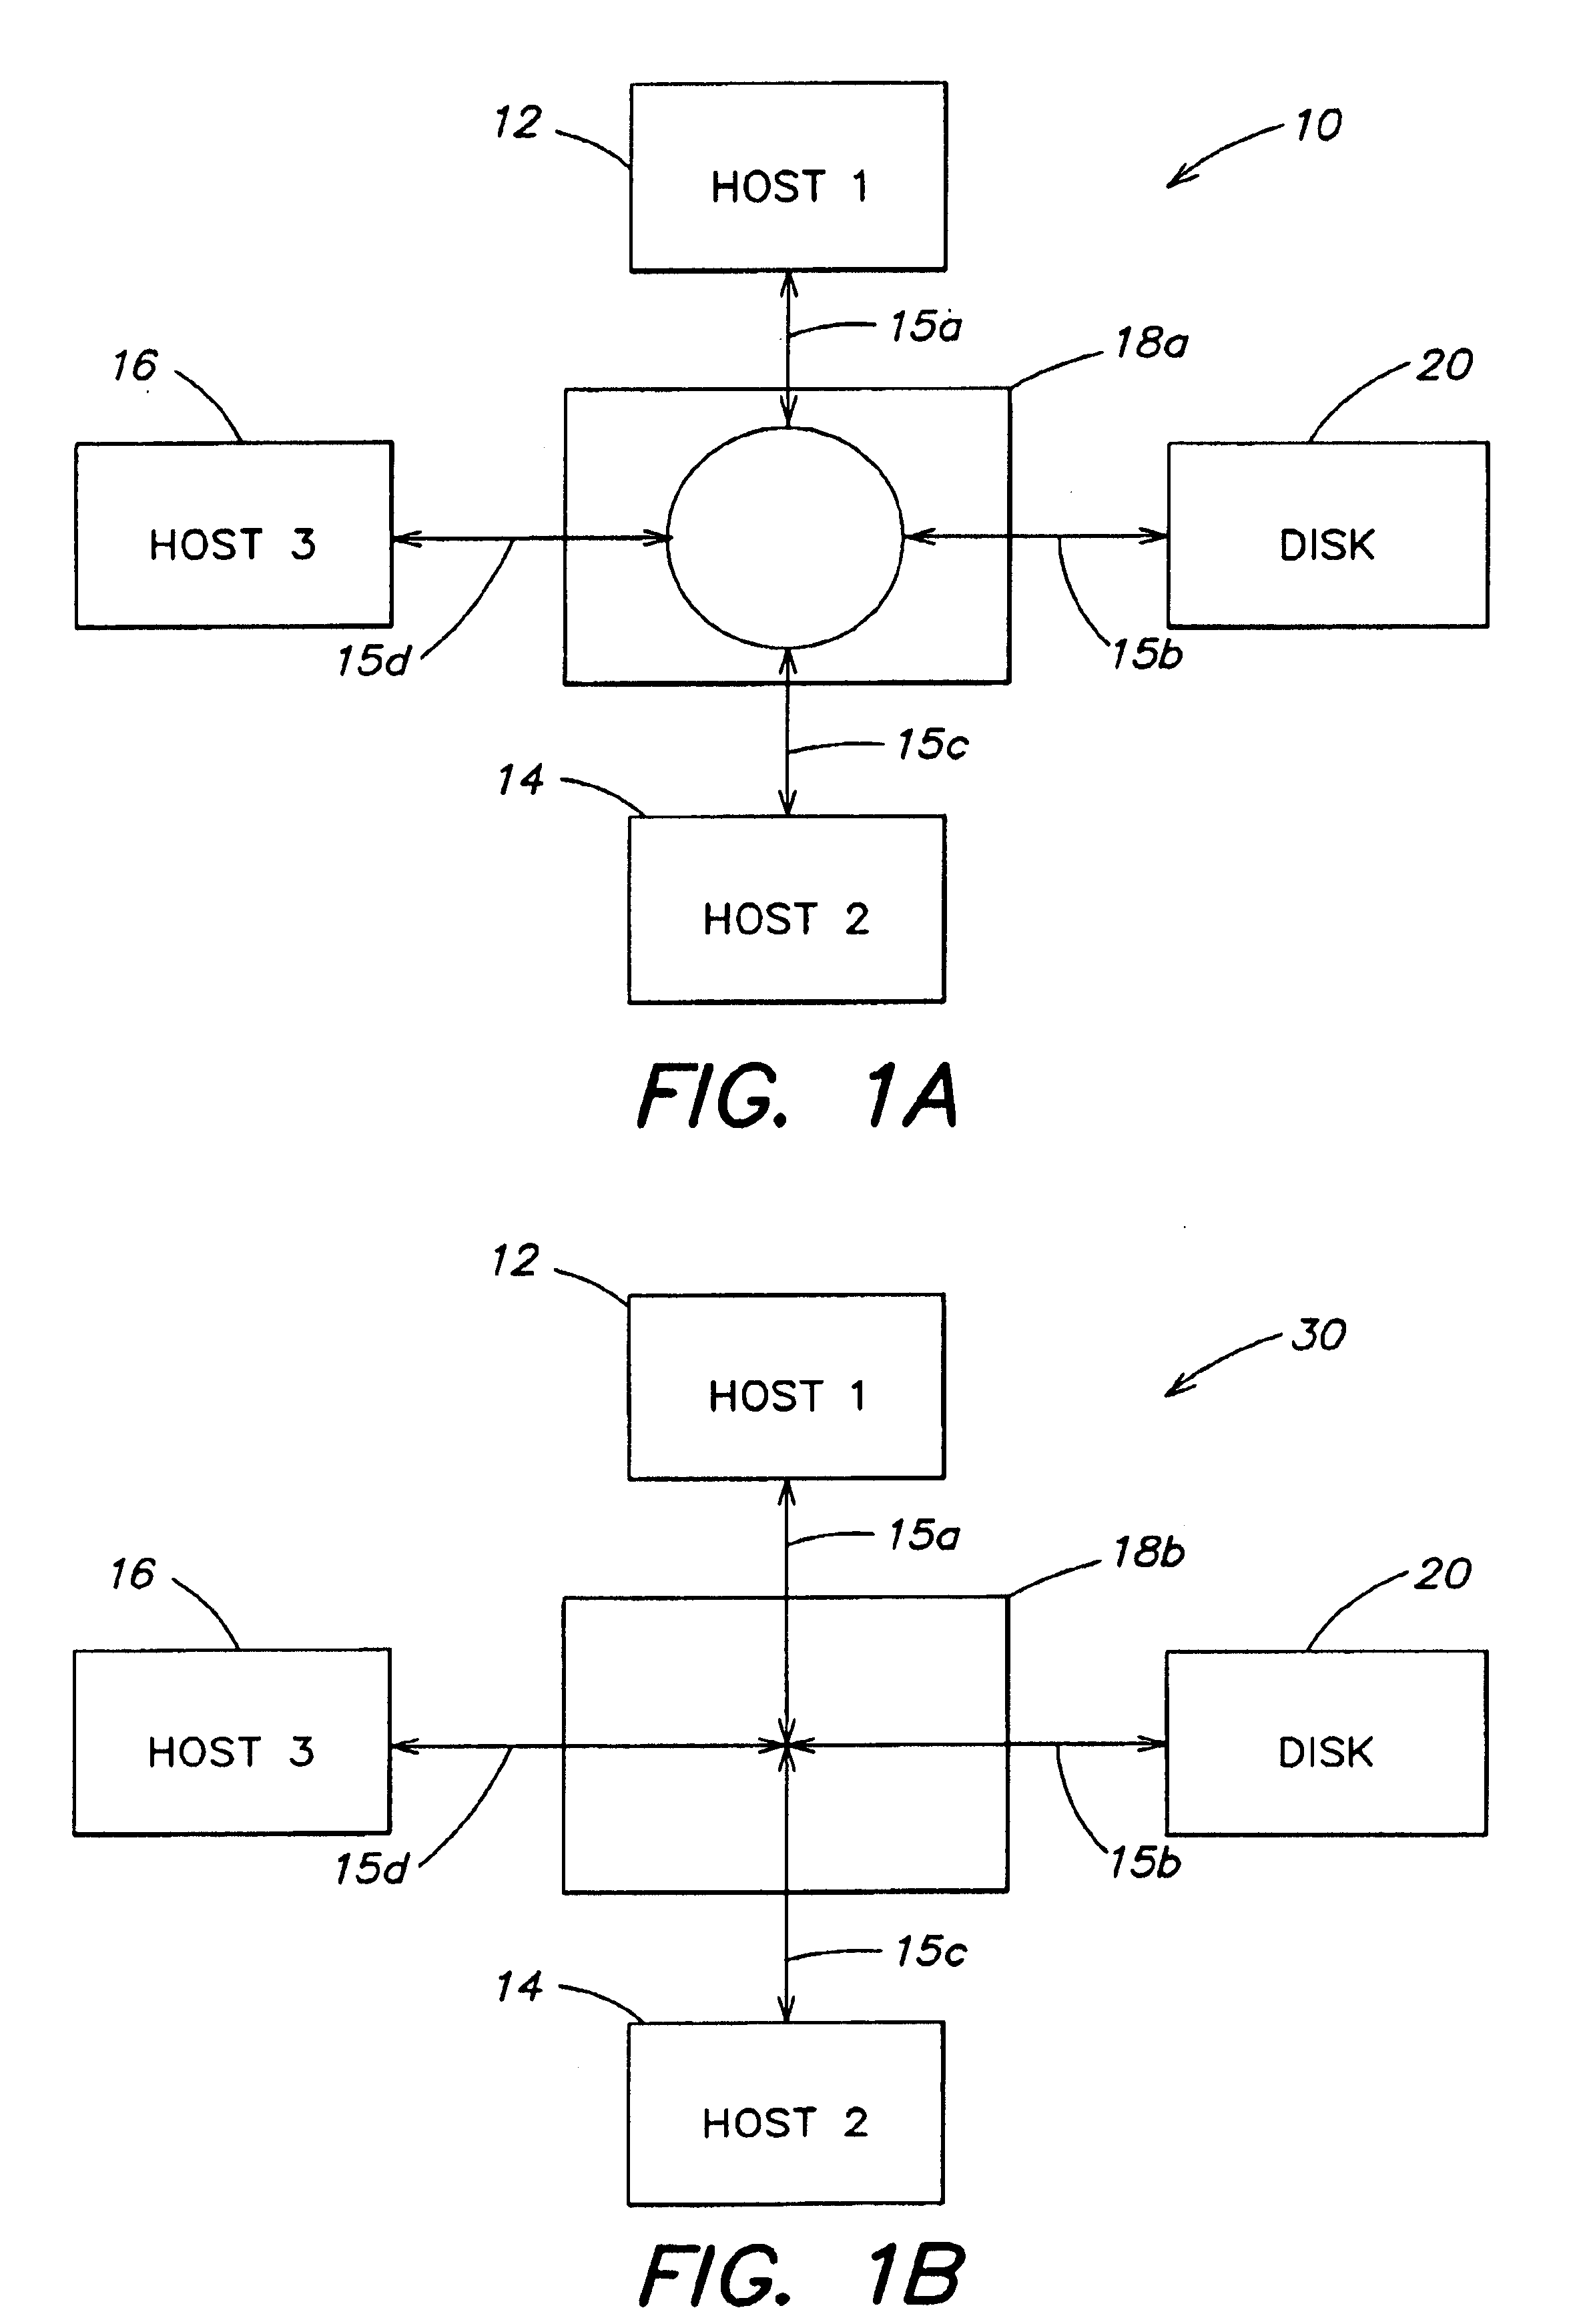 Method and apparatus for identifying network devices on a storage network